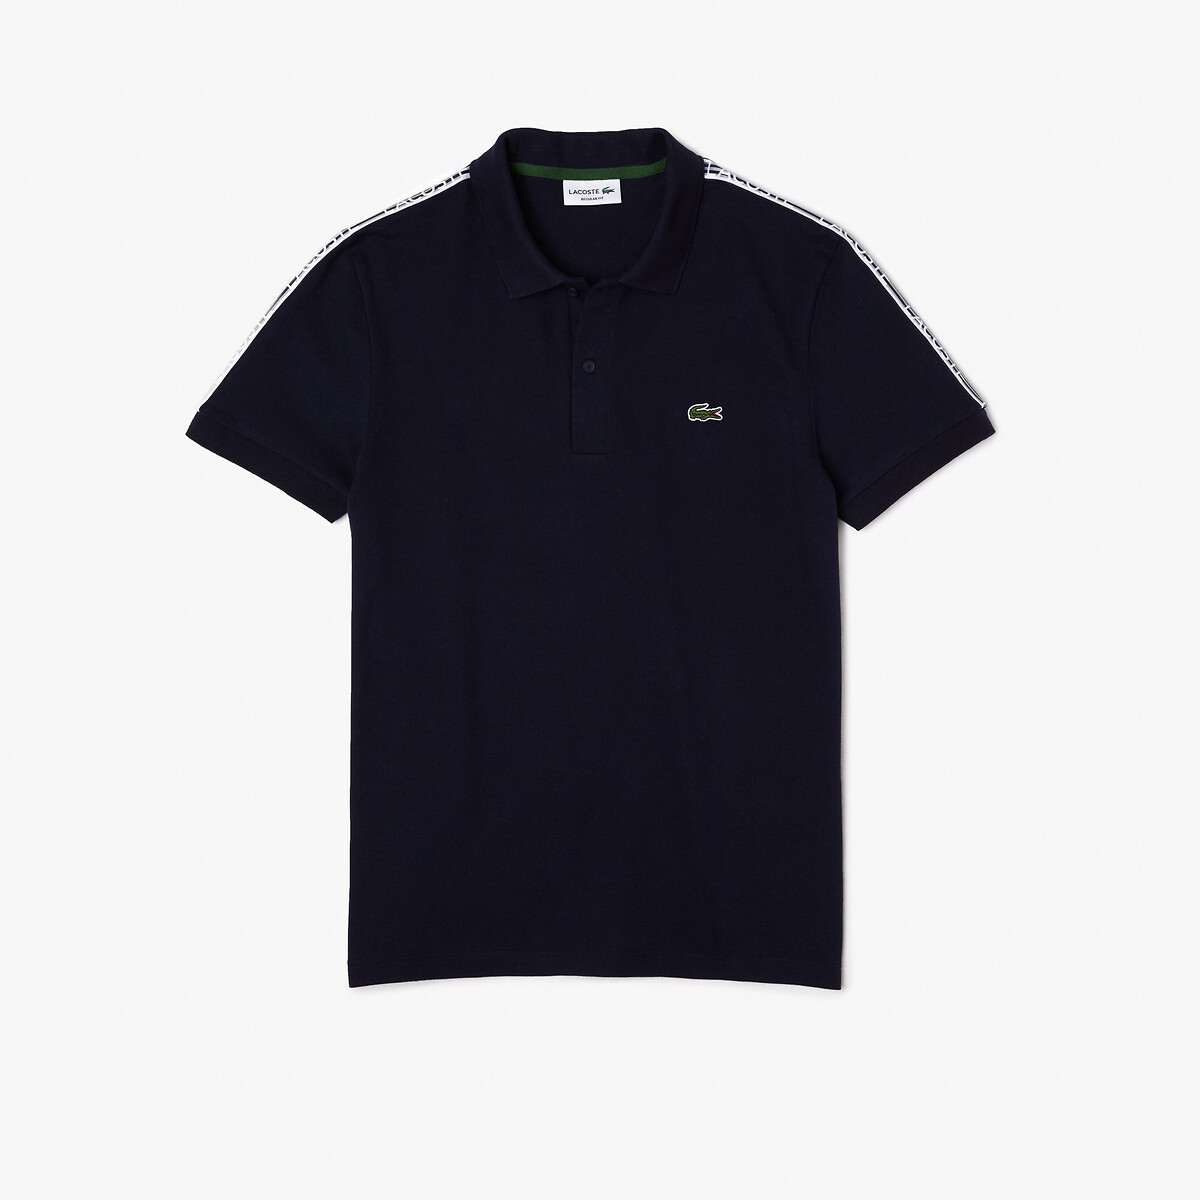 Embroidered Logo Polo Shirt in Cotton with Buttoned Collar and Short Sleeves